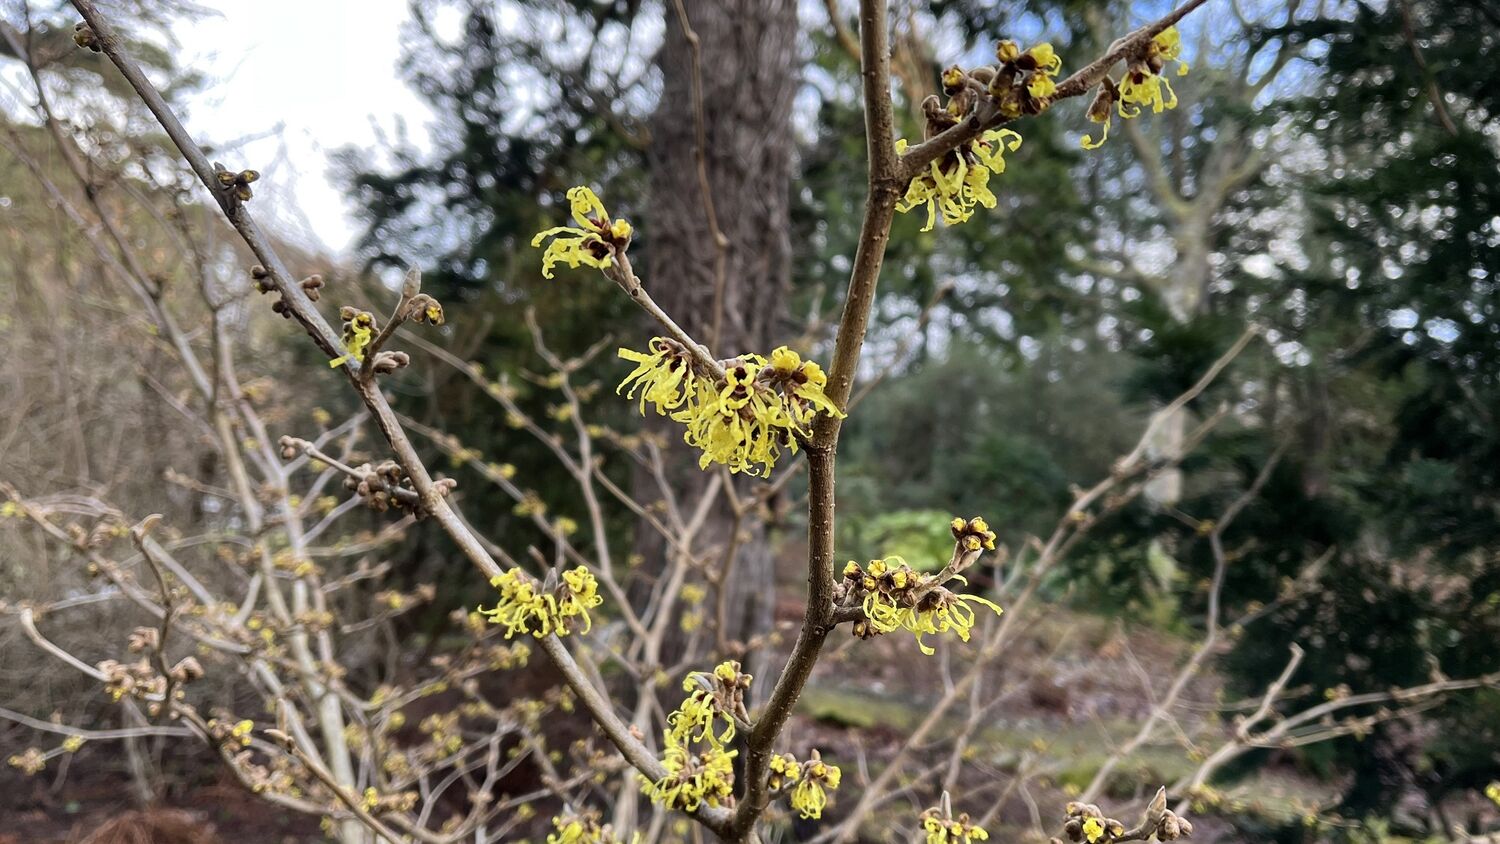 A close-up of a small witch hazel tree, with lime green petals just starting to emerge on its thin branches.